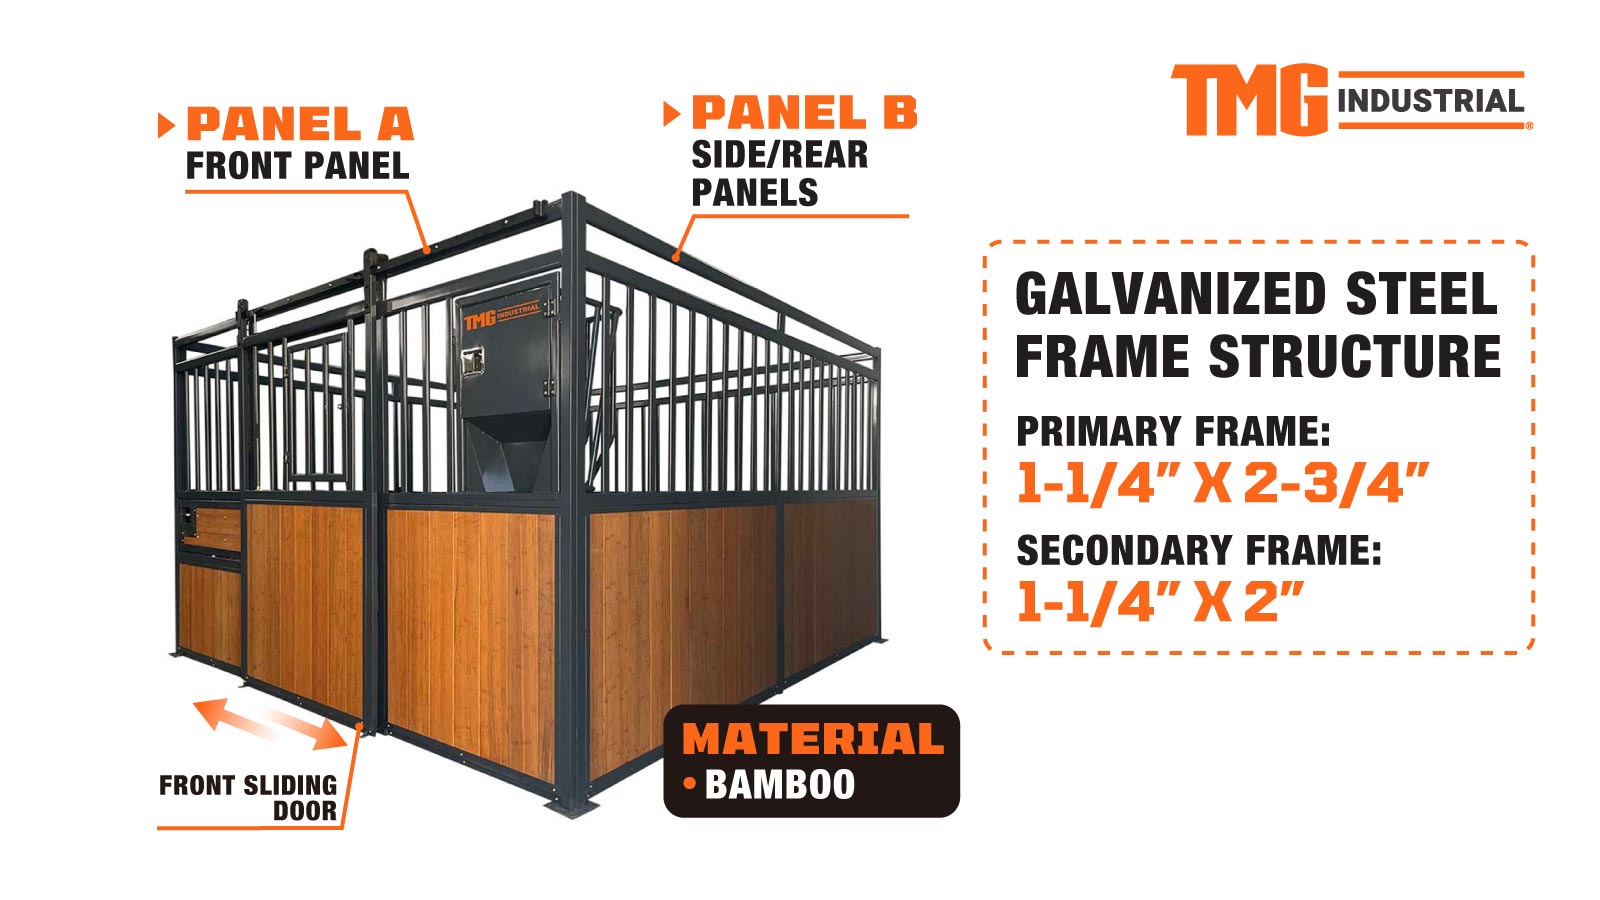 TMG Industrial 12’ x 12’ Bamboo Horse Stall, Vertical Bar Top, Window/Feeder Opening, Front Sliding Door w/Double-Gravity Latch, TMG-FHS13-description-image